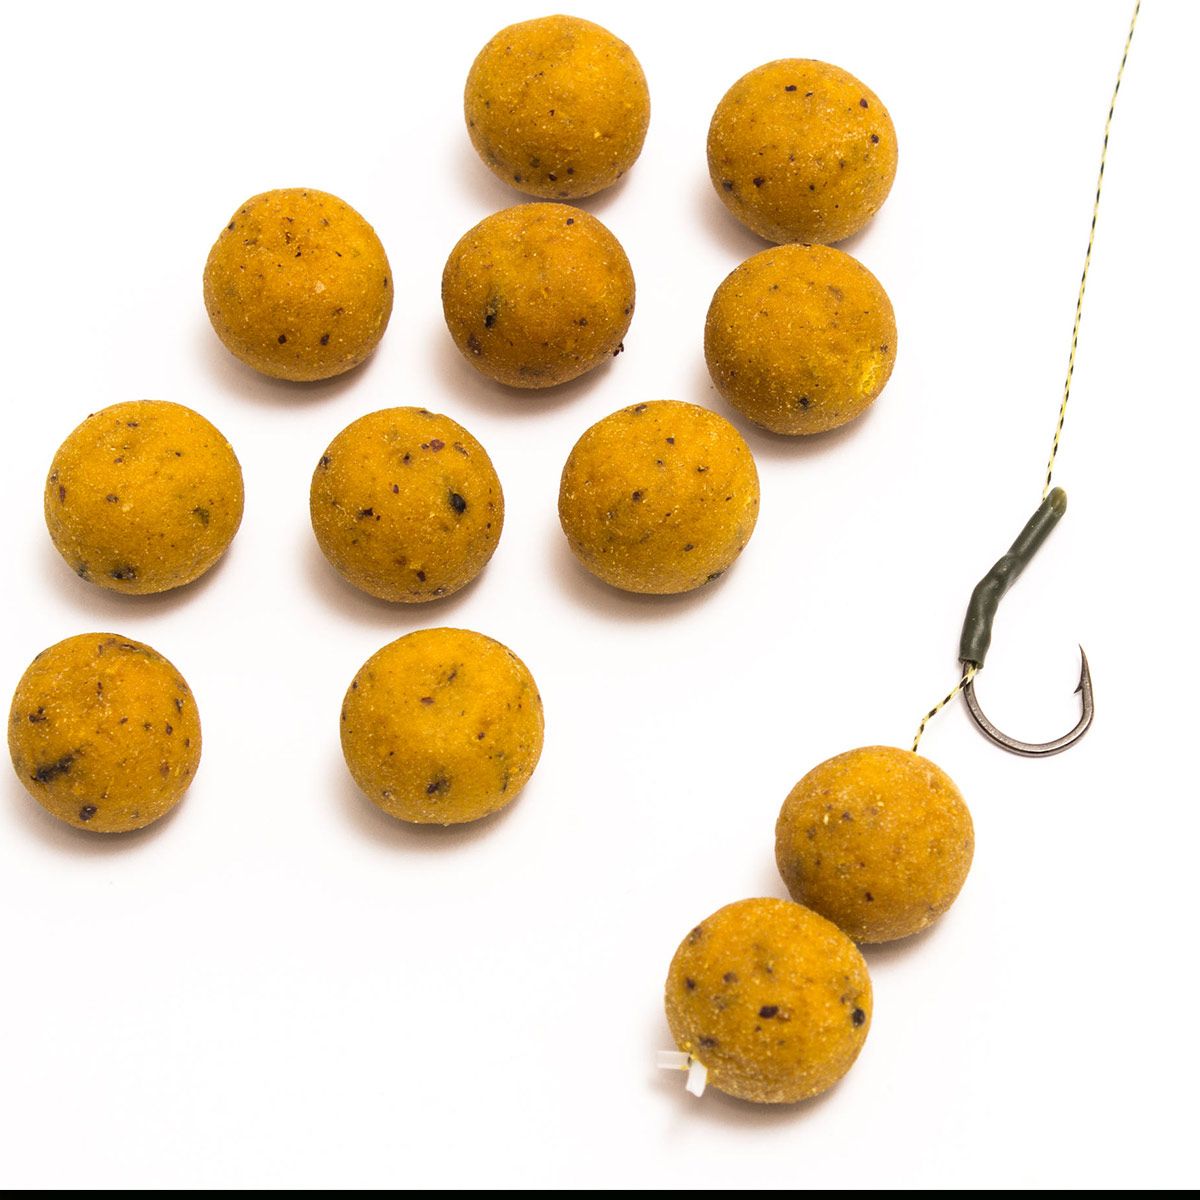 What Bait Do You Use To Catch Carp :: Boilies